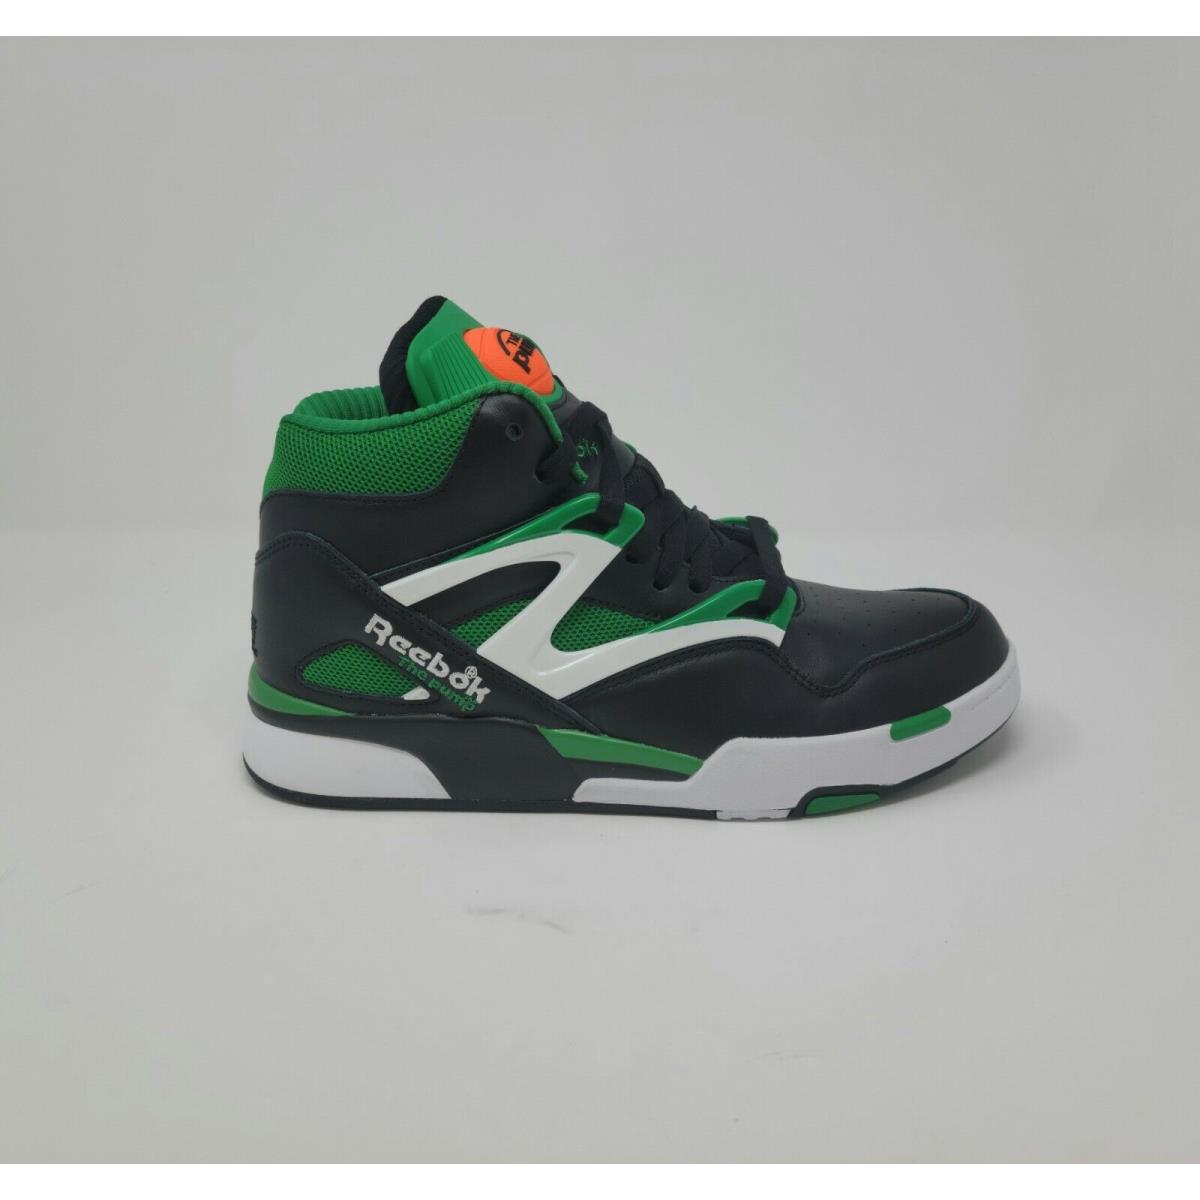 Reebok Men`s Pump Omni Zone II Basketball Shoes Based on a 1991 Player Exclusive